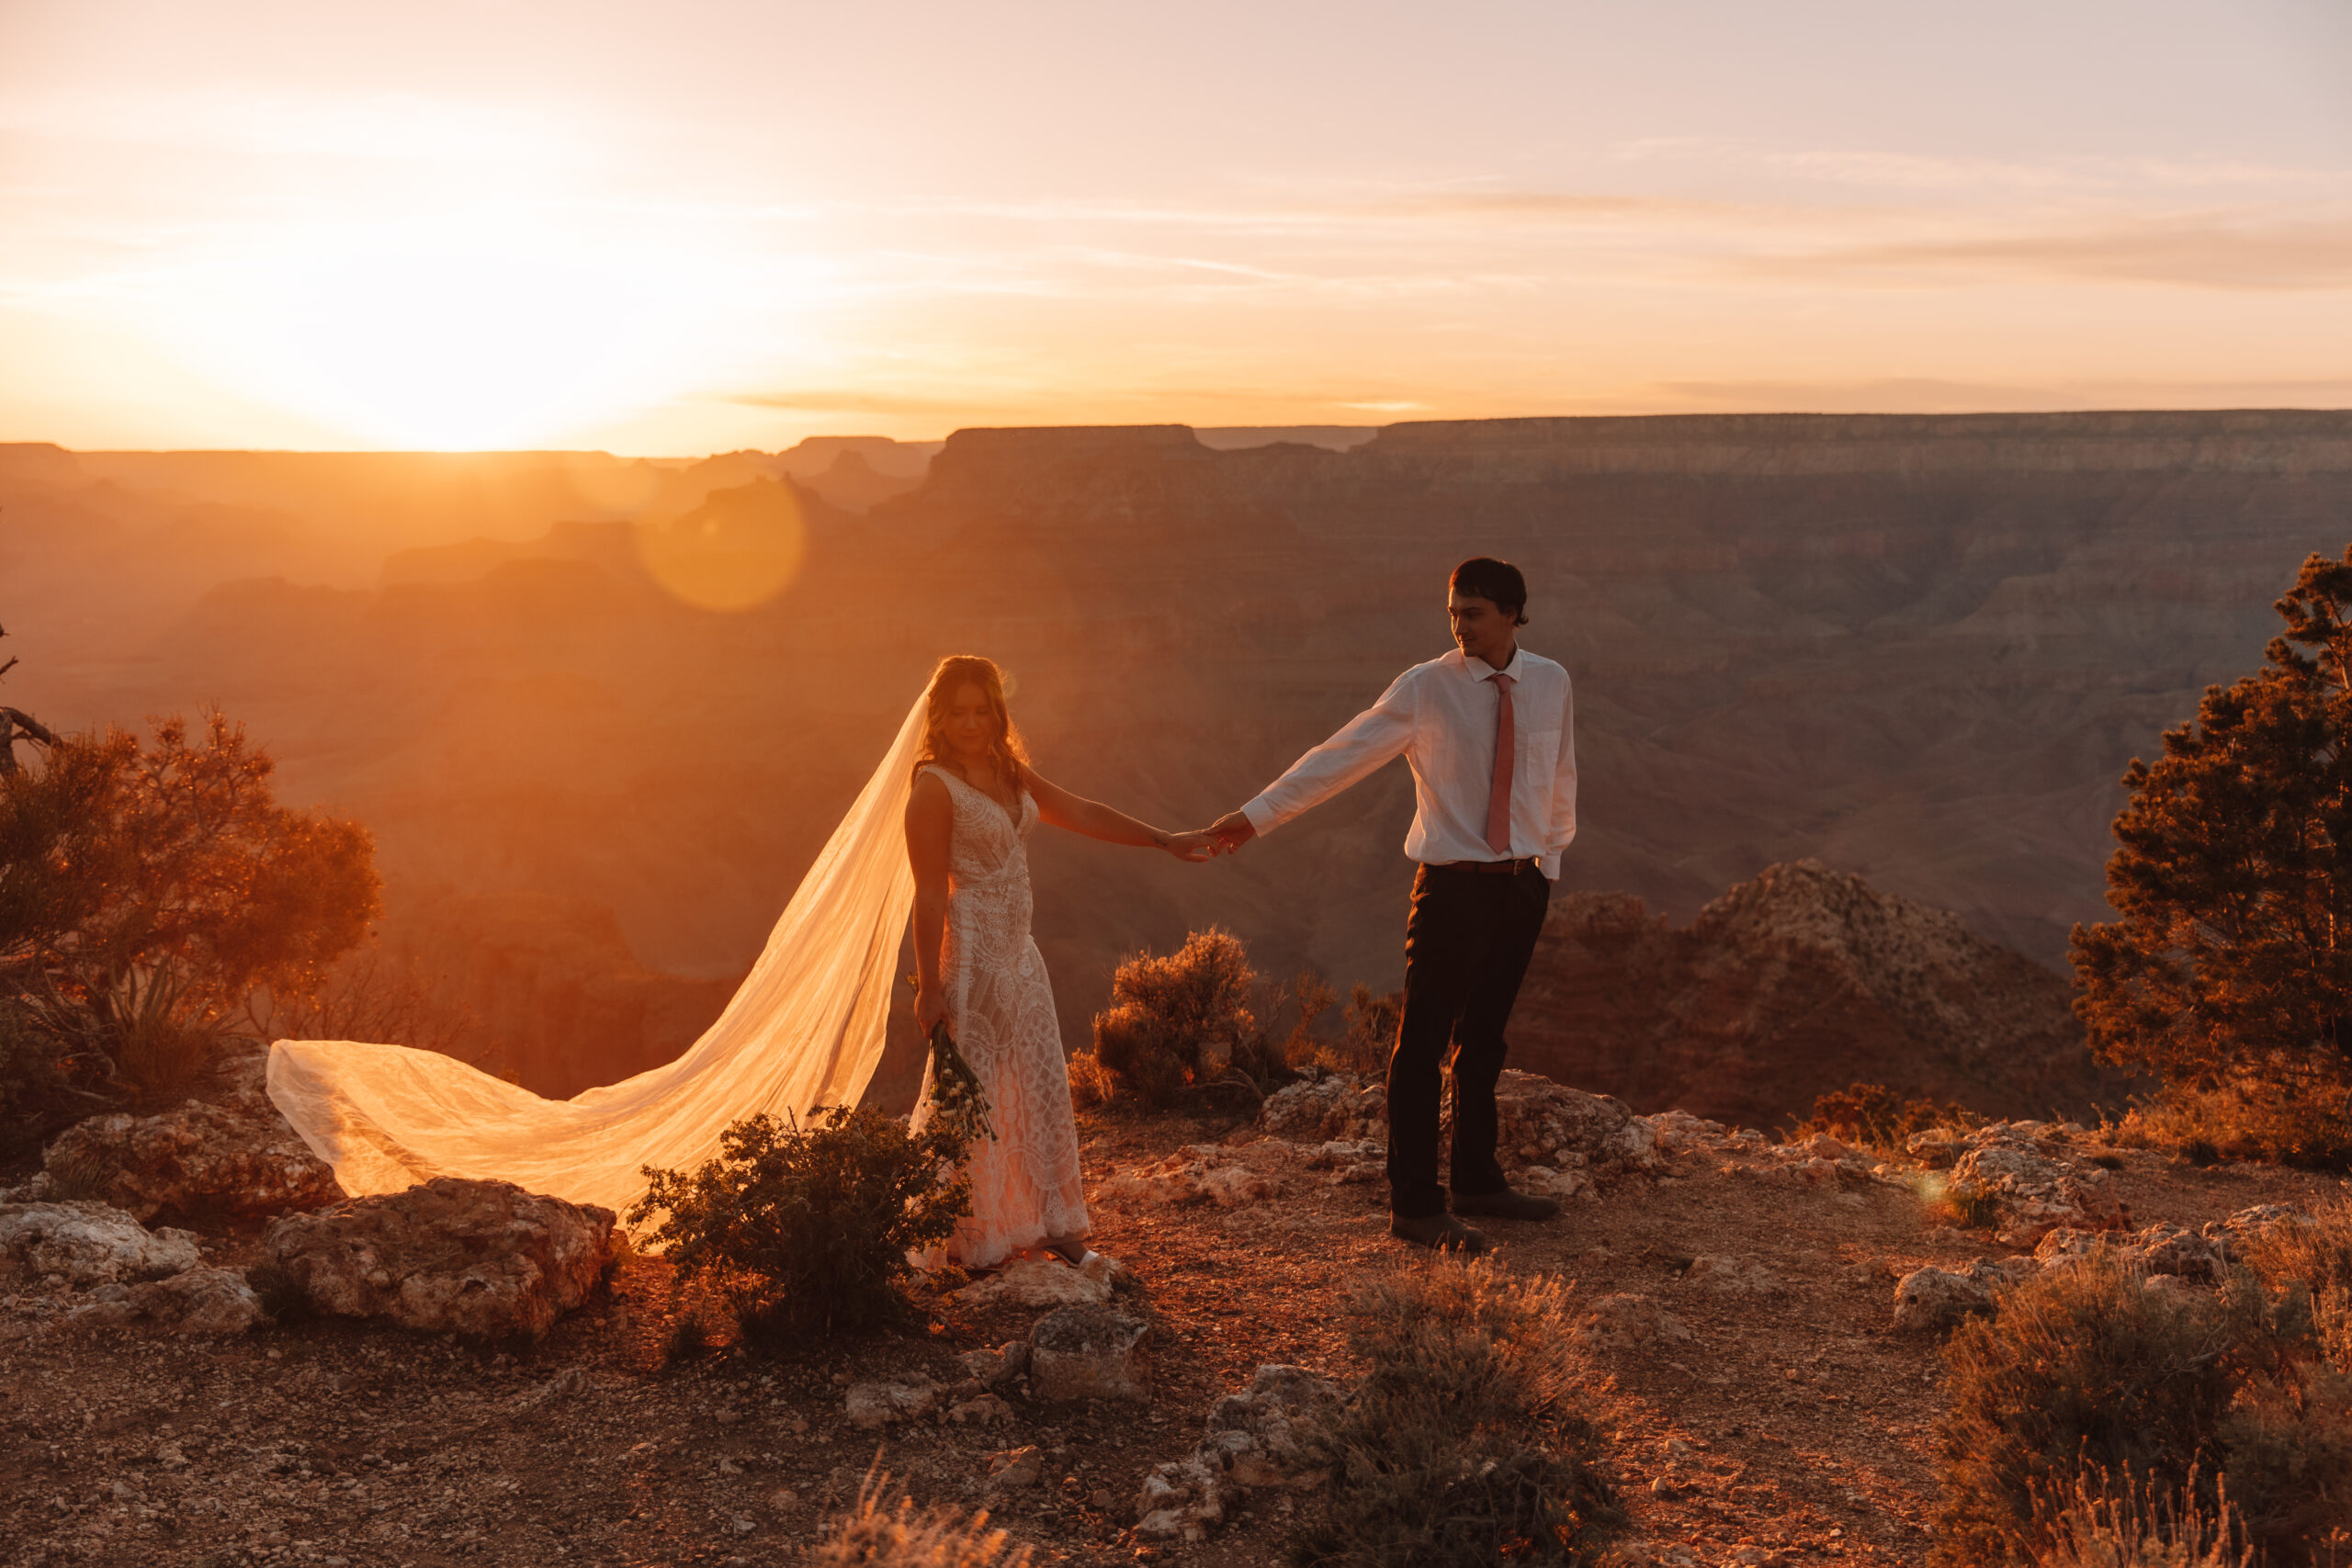 A groom walking in front of his bride, while he's holding her hand and leading her across the cliff as the sun sets behind them. Her veil is long and flowing behind her. She is wearing a beautiful lace elopement dress